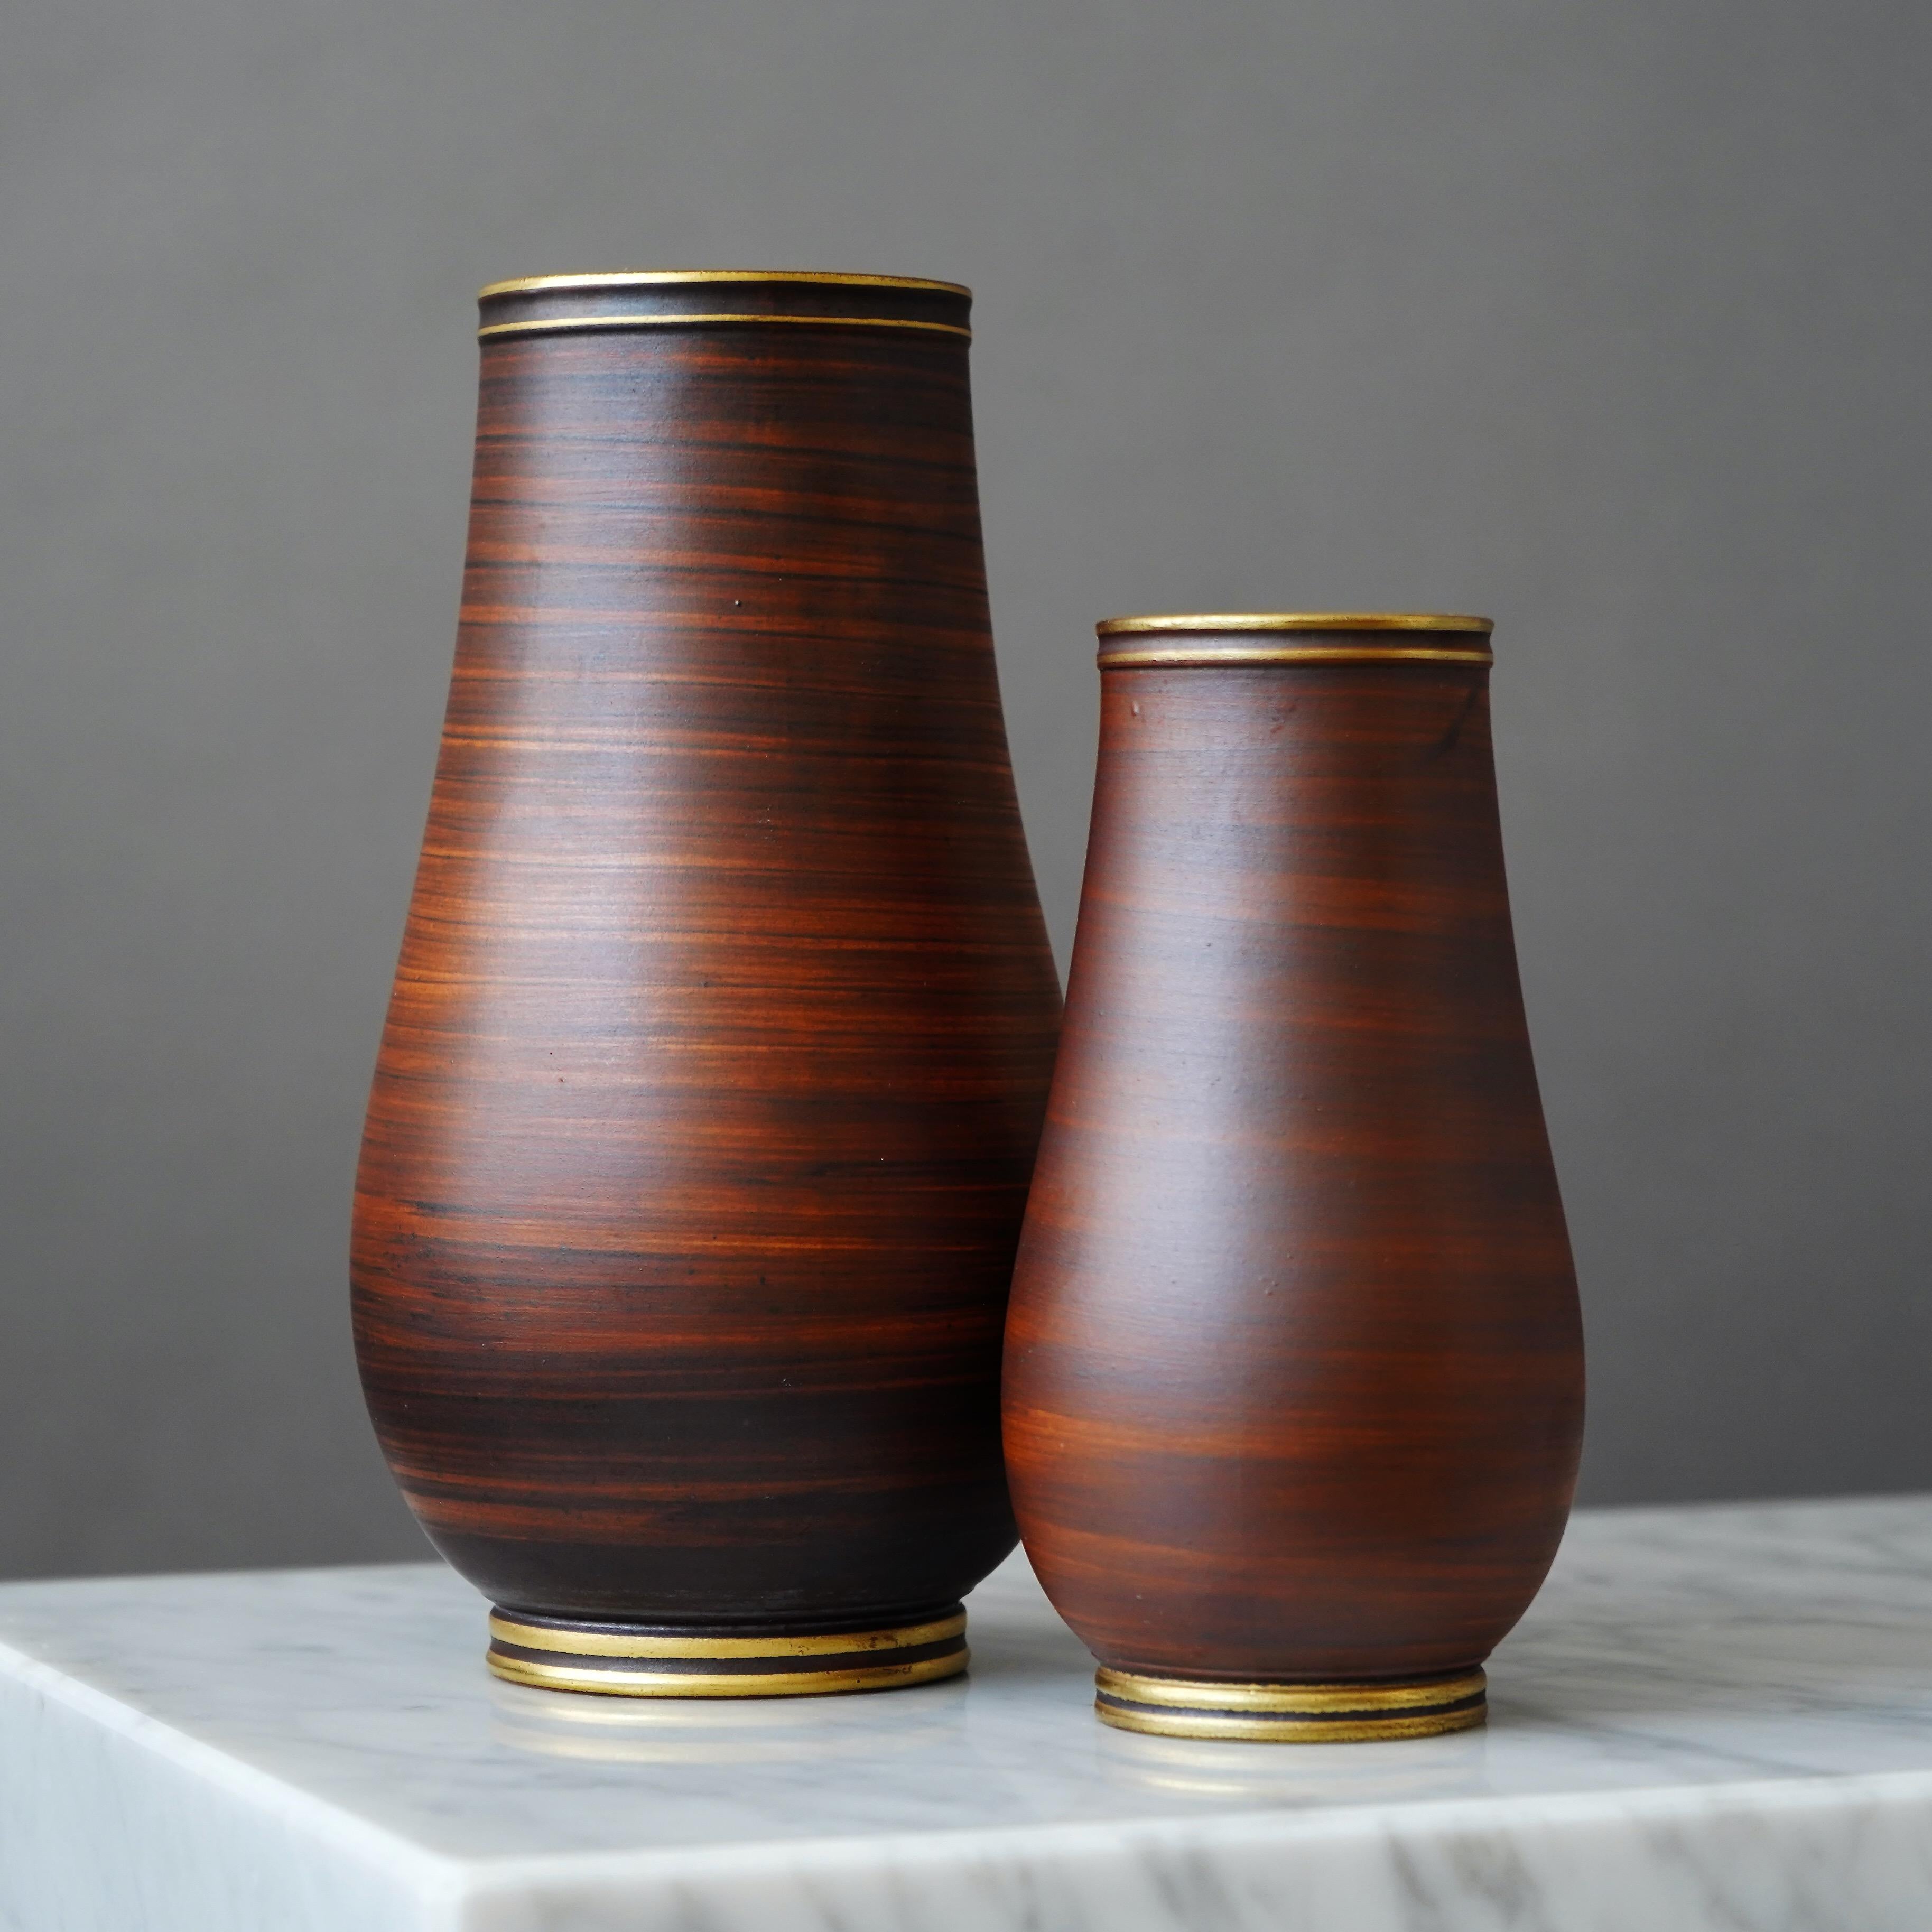 Set of 2 stoneware art deco vases with beautiful brown glaze. Foot and mouth detailed in gold.
Designed by Gunnar Nylund for ALP (Lidköpings Porslinsfabrik), Sweden, 1930s.

Great condition.
Stamped 'ALP', 'Modell Nylund', 'Lidköping, SWEDEN' and